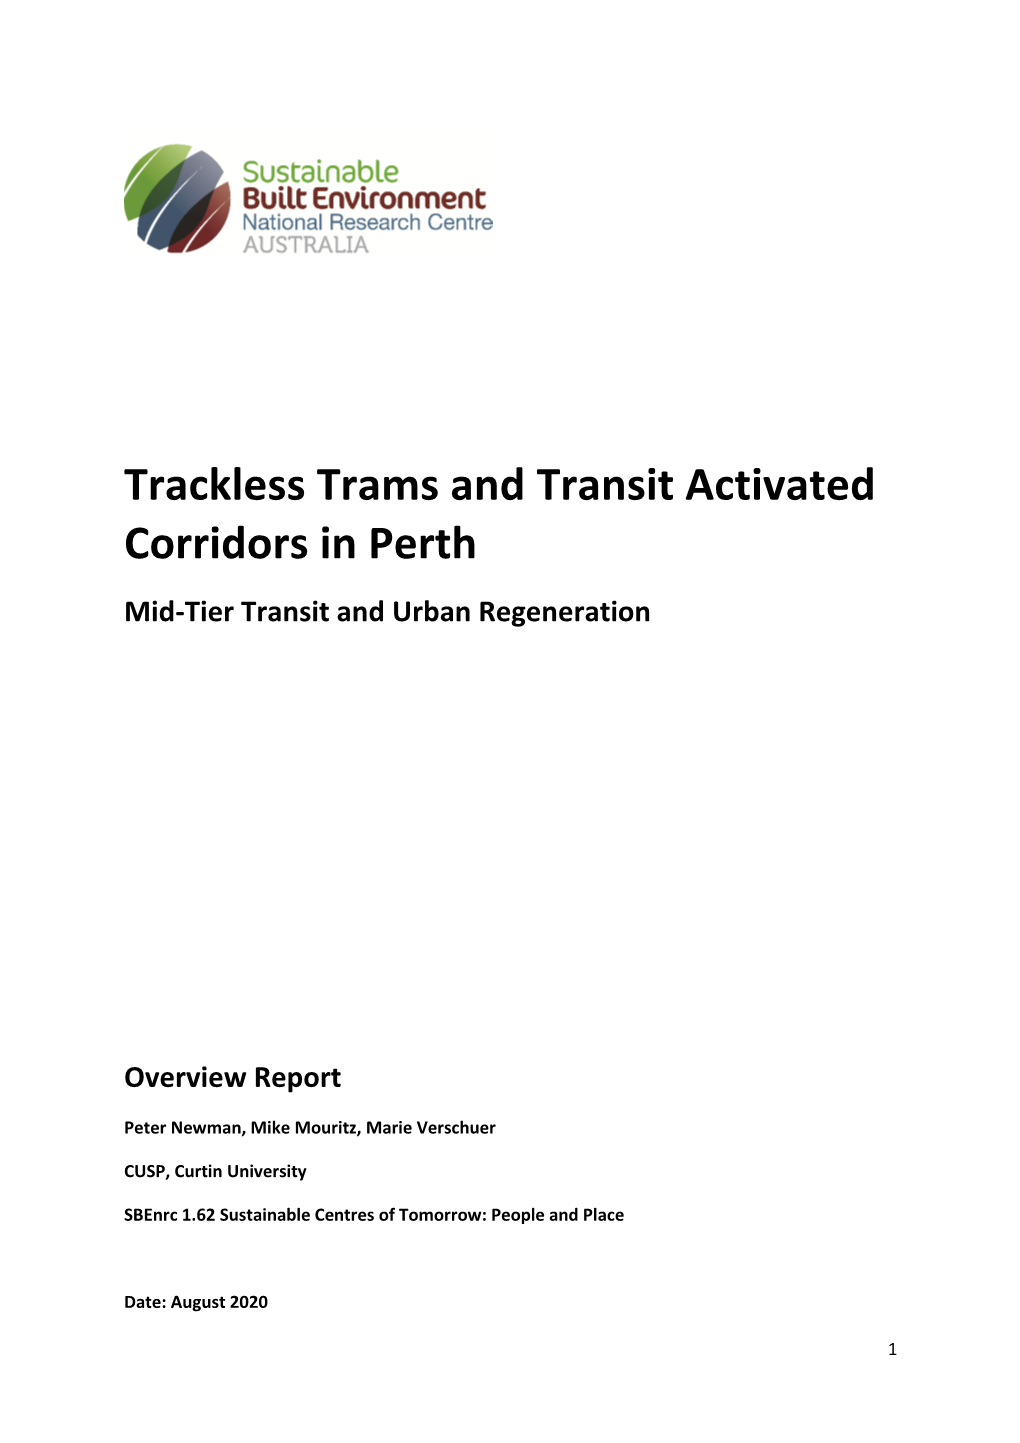 Trackless Trams and Transit Activated Corridors in Perth: Mid-Tier Transit and Urban Regeneration Overview Report